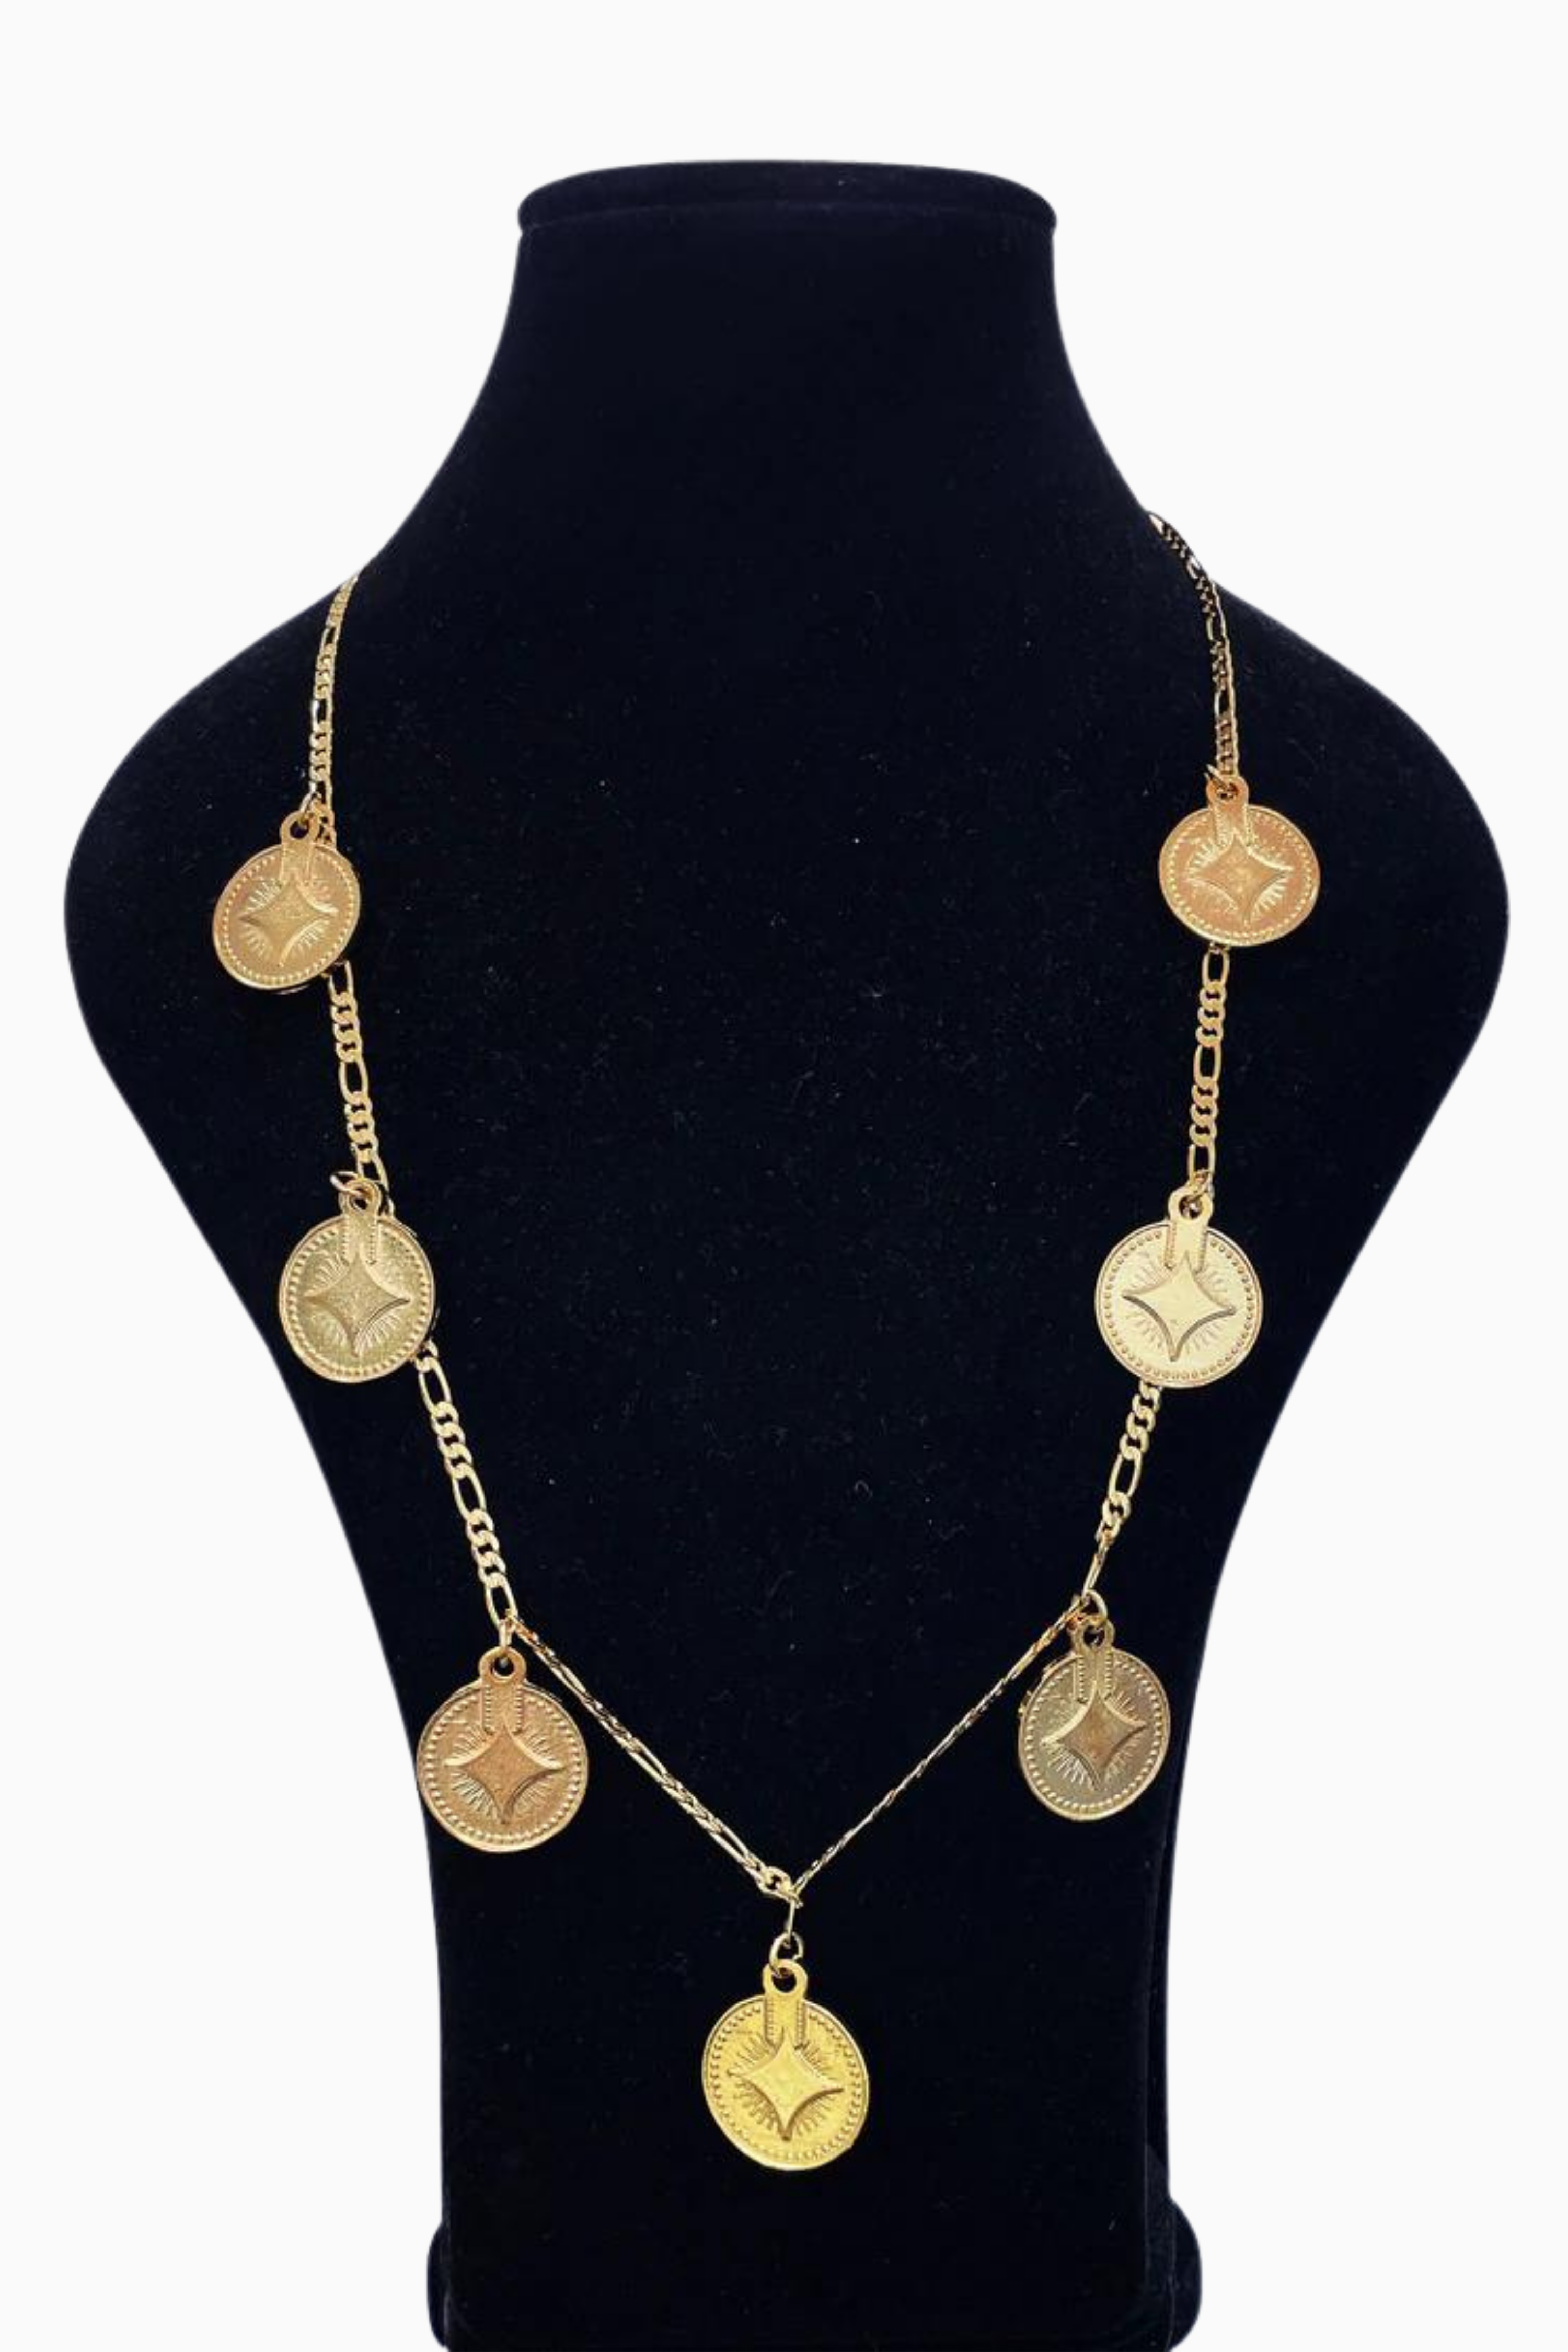 Indi Coin Gold Necklace / Belly Chain